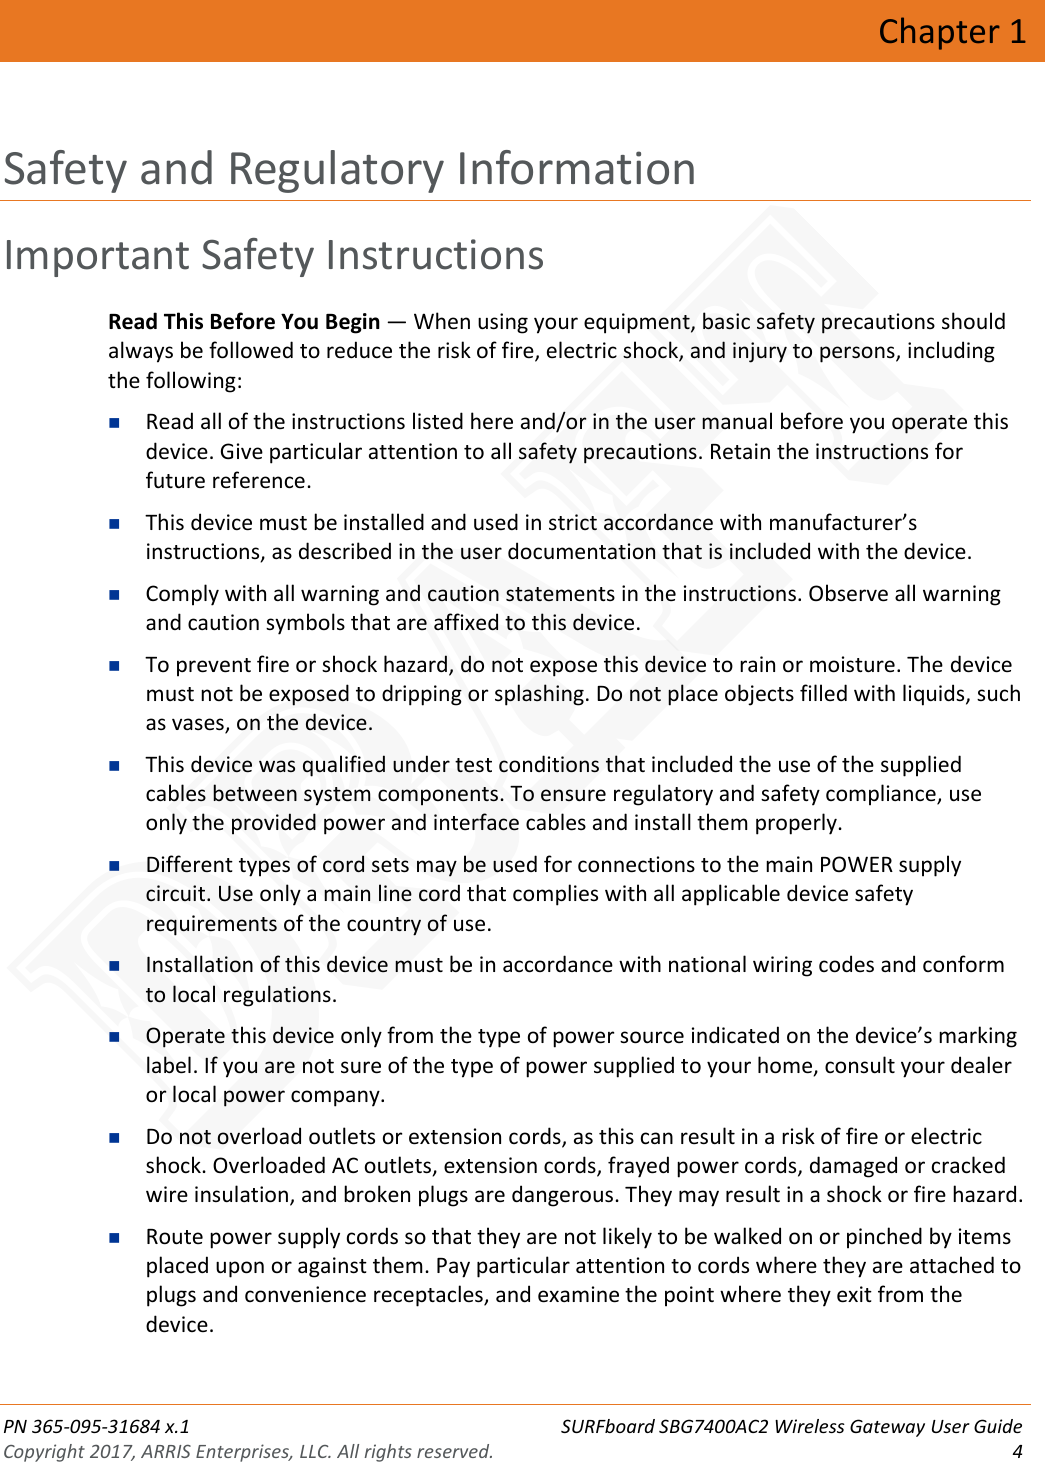  PN 365-095-31684 x.1 SURFboard SBG7400AC2 Wireless Gateway User Guide Copyright 2017, ARRIS Enterprises, LLC. All rights reserved.  4  Chapter 1 Safety and Regulatory Information Important Safety Instructions Read This Before You Begin — When using your equipment, basic safety precautions should always be followed to reduce the risk of fire, electric shock, and injury to persons, including the following:   Read all of the instructions listed here and/or in the user manual before you operate this device. Give particular attention to all safety precautions. Retain the instructions for future reference.  This device must be installed and used in strict accordance with manufacturer’s instructions, as described in the user documentation that is included with the device.  Comply with all warning and caution statements in the instructions. Observe all warning and caution symbols that are affixed to this device.  To prevent fire or shock hazard, do not expose this device to rain or moisture. The device must not be exposed to dripping or splashing. Do not place objects filled with liquids, such as vases, on the device.  This device was qualified under test conditions that included the use of the supplied cables between system components. To ensure regulatory and safety compliance, use only the provided power and interface cables and install them properly.   Different types of cord sets may be used for connections to the main POWER supply circuit. Use only a main line cord that complies with all applicable device safety requirements of the country of use.  Installation of this device must be in accordance with national wiring codes and conform to local regulations.  Operate this device only from the type of power source indicated on the device’s marking label. If you are not sure of the type of power supplied to your home, consult your dealer or local power company.  Do not overload outlets or extension cords, as this can result in a risk of fire or electric shock. Overloaded AC outlets, extension cords, frayed power cords, damaged or cracked wire insulation, and broken plugs are dangerous. They may result in a shock or fire hazard.  Route power supply cords so that they are not likely to be walked on or pinched by items placed upon or against them. Pay particular attention to cords where they are attached to plugs and convenience receptacles, and examine the point where they exit from the device. DRAFT